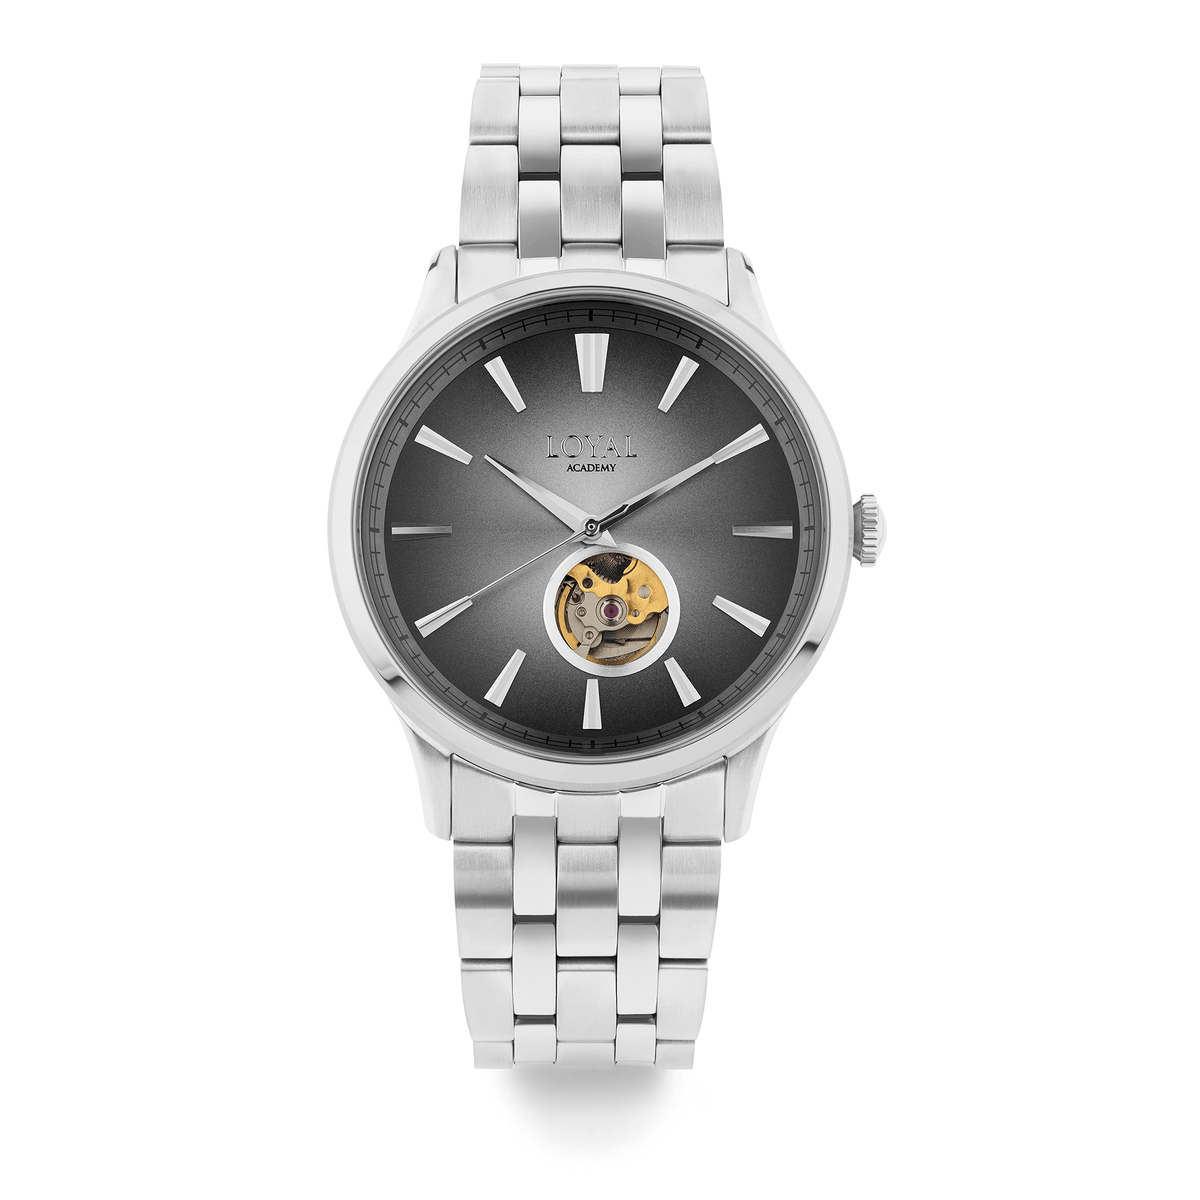 Loyal Academy Men's 42.20mm Stainless Steel Automatic Watch - Wallace Bishop